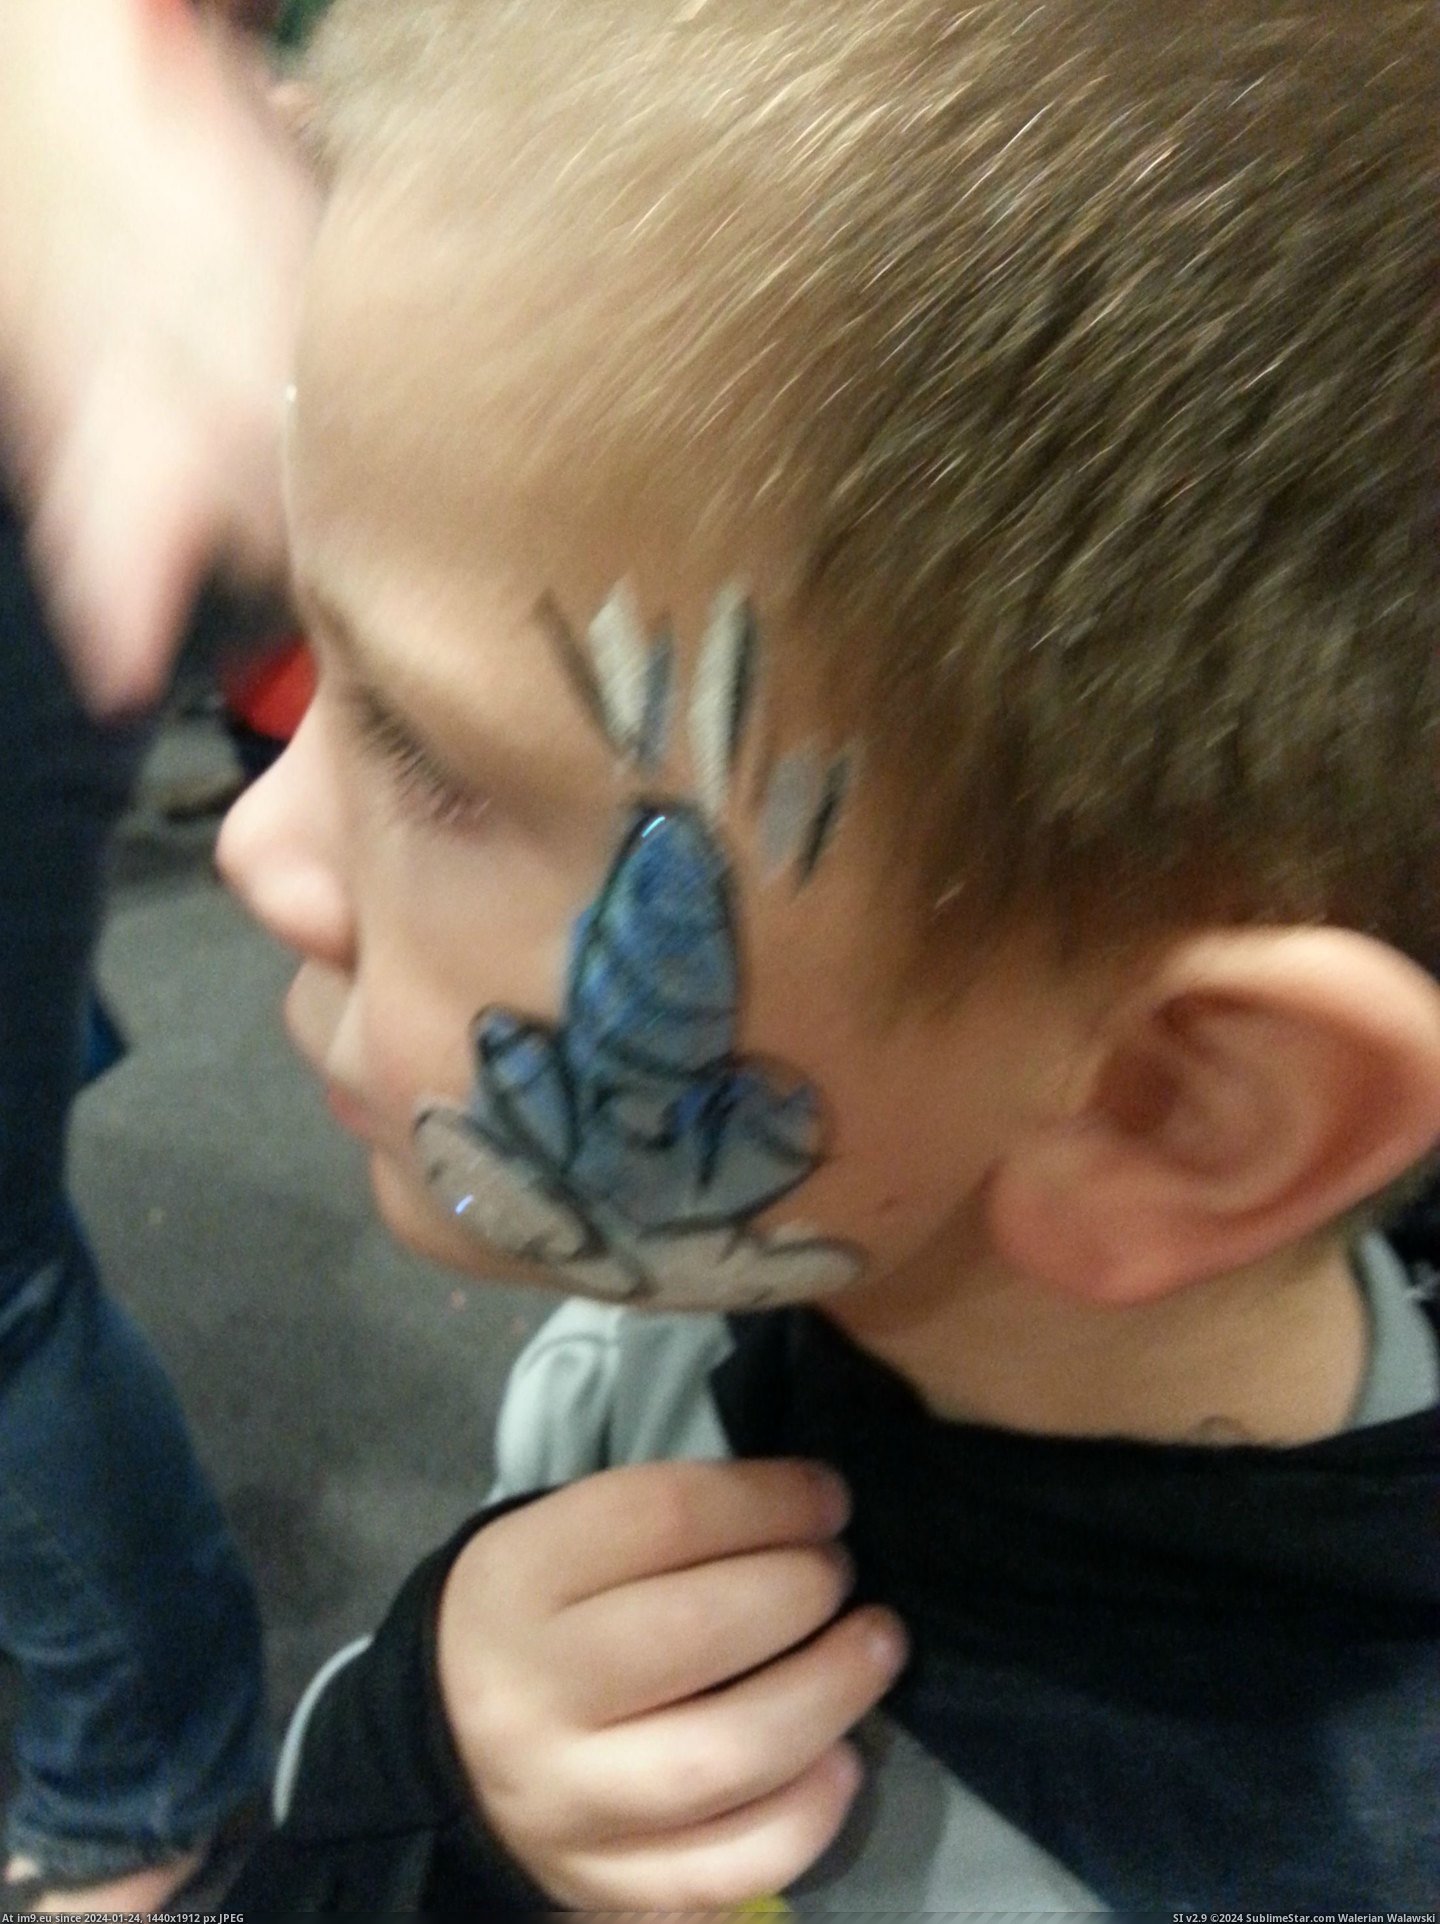 #Wtf #For #Face #Awkward #Evening #Clown #Rocket #Son #Church #Drew [Wtf] A clown drew this 'rocket' on my son's face at a church function. Made for an awkward evening. [OC] Pic. (Image of album My r/WTF favs))